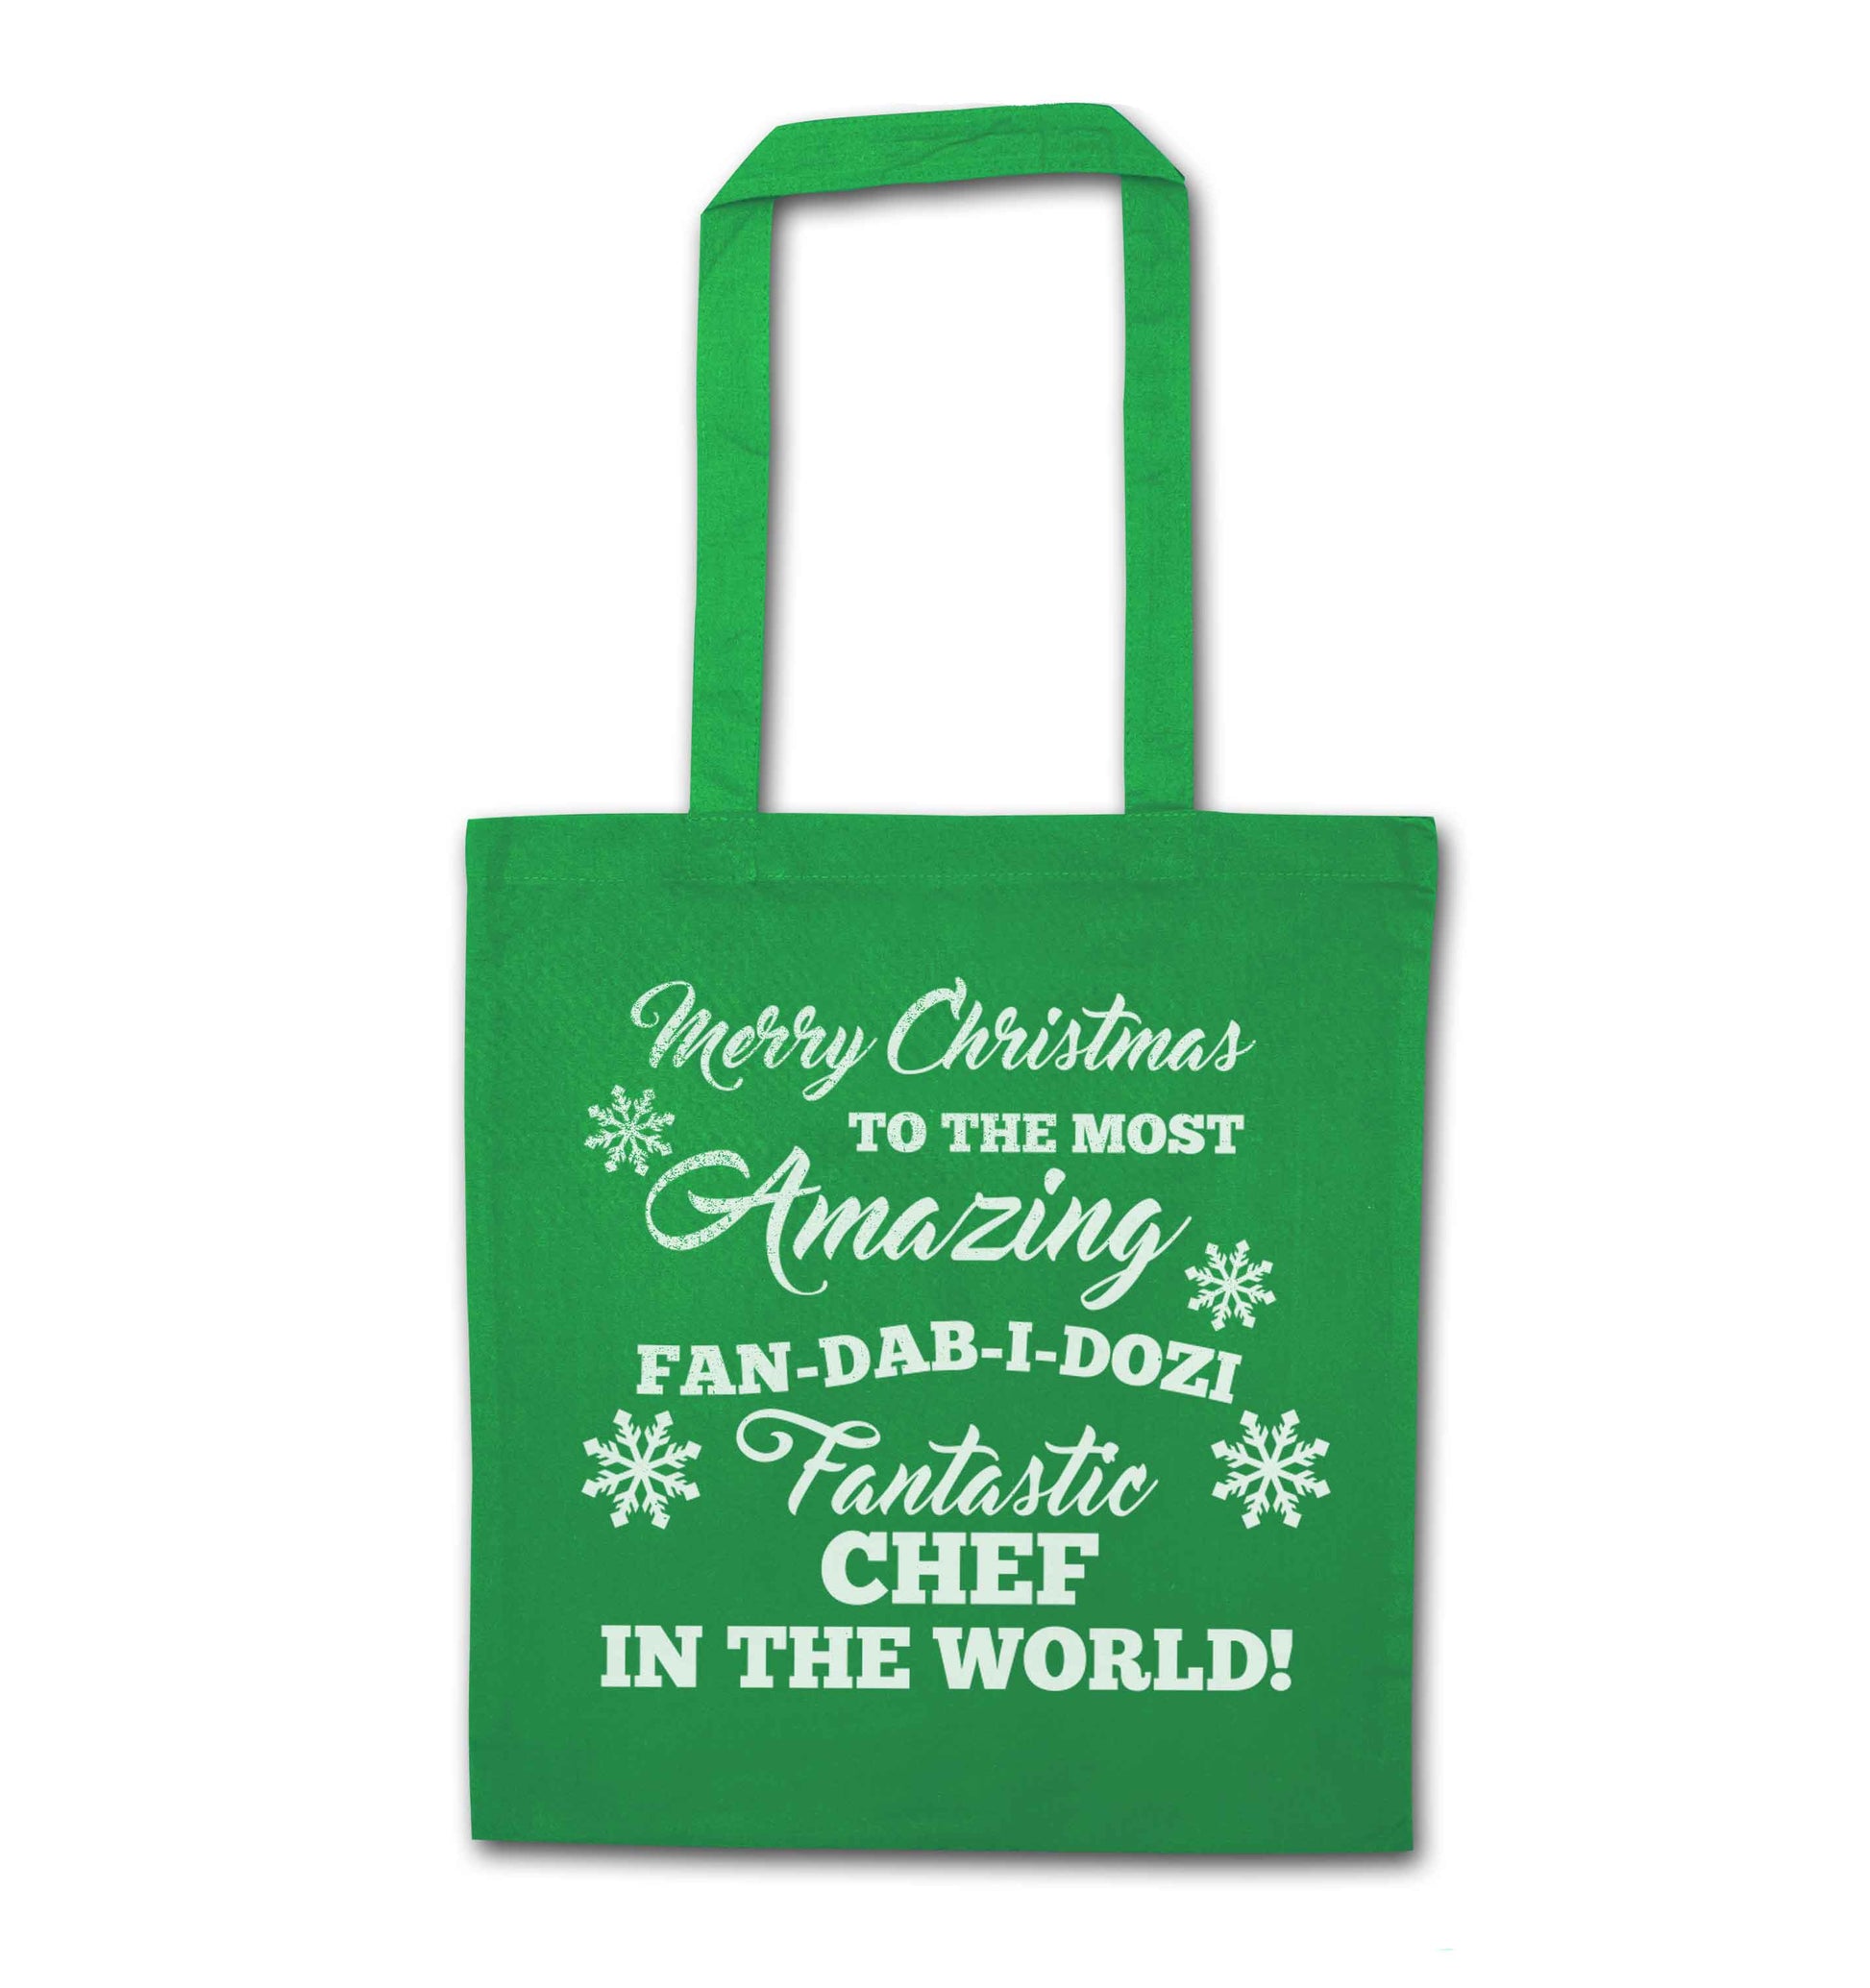 Merry Christmas to the most amazing fan-dab-i-dozi fantasic chef in the world green tote bag